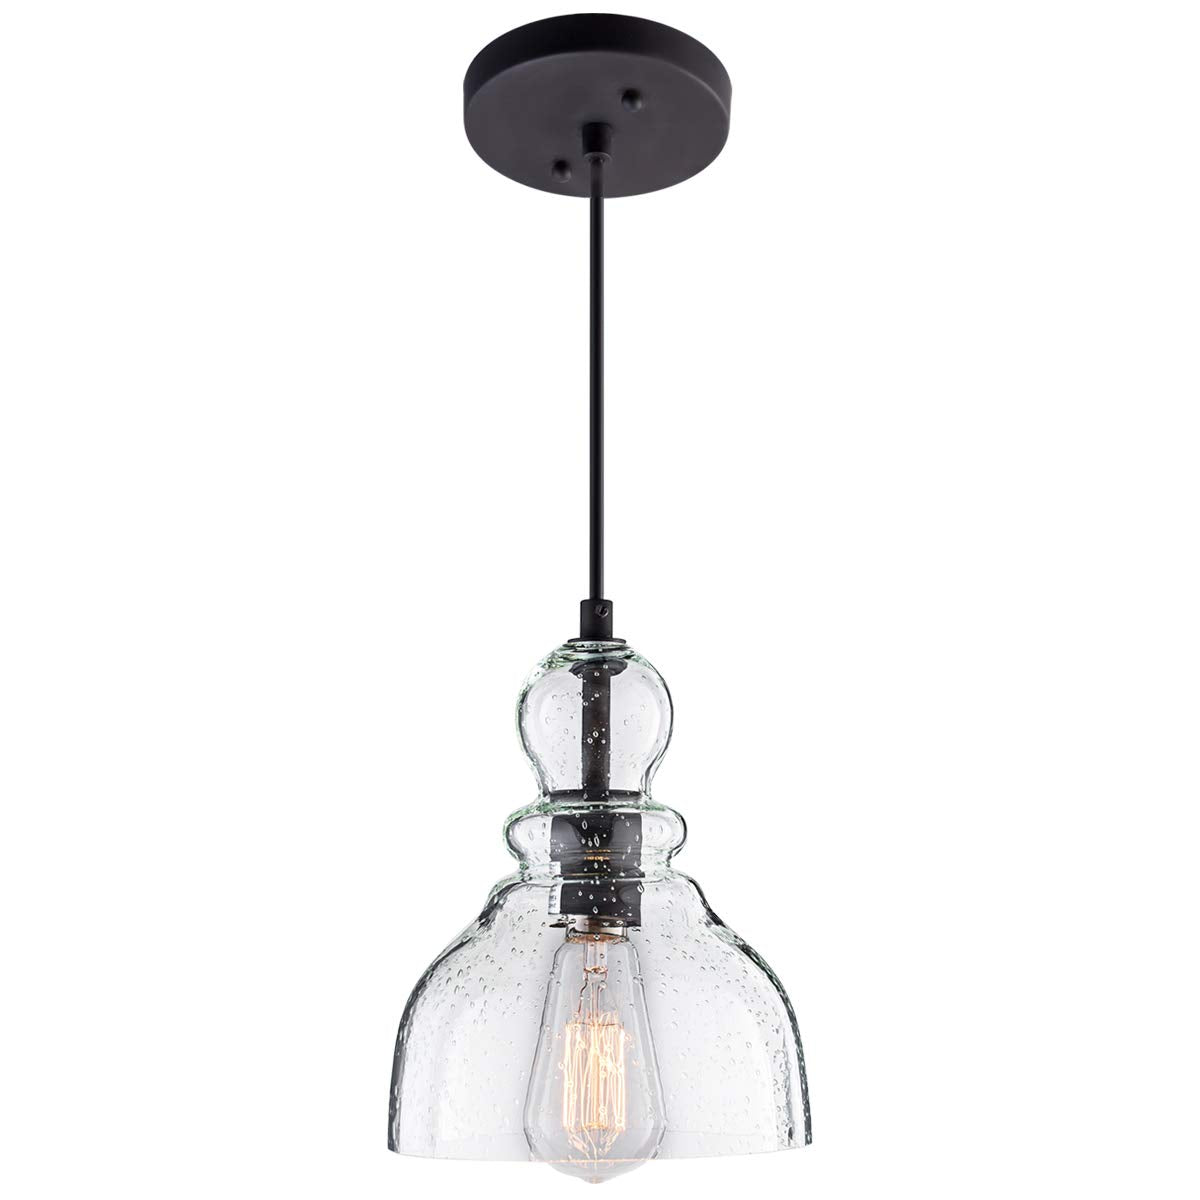 Industrial Mini Pendant Lighting with Handblown Clear Seeded Glass Shade, Adjustable Cord Farmhouse Lamp Ceiling Pendant Light Fixture for Kitchen Island Restaurant, Black, 1 Pack